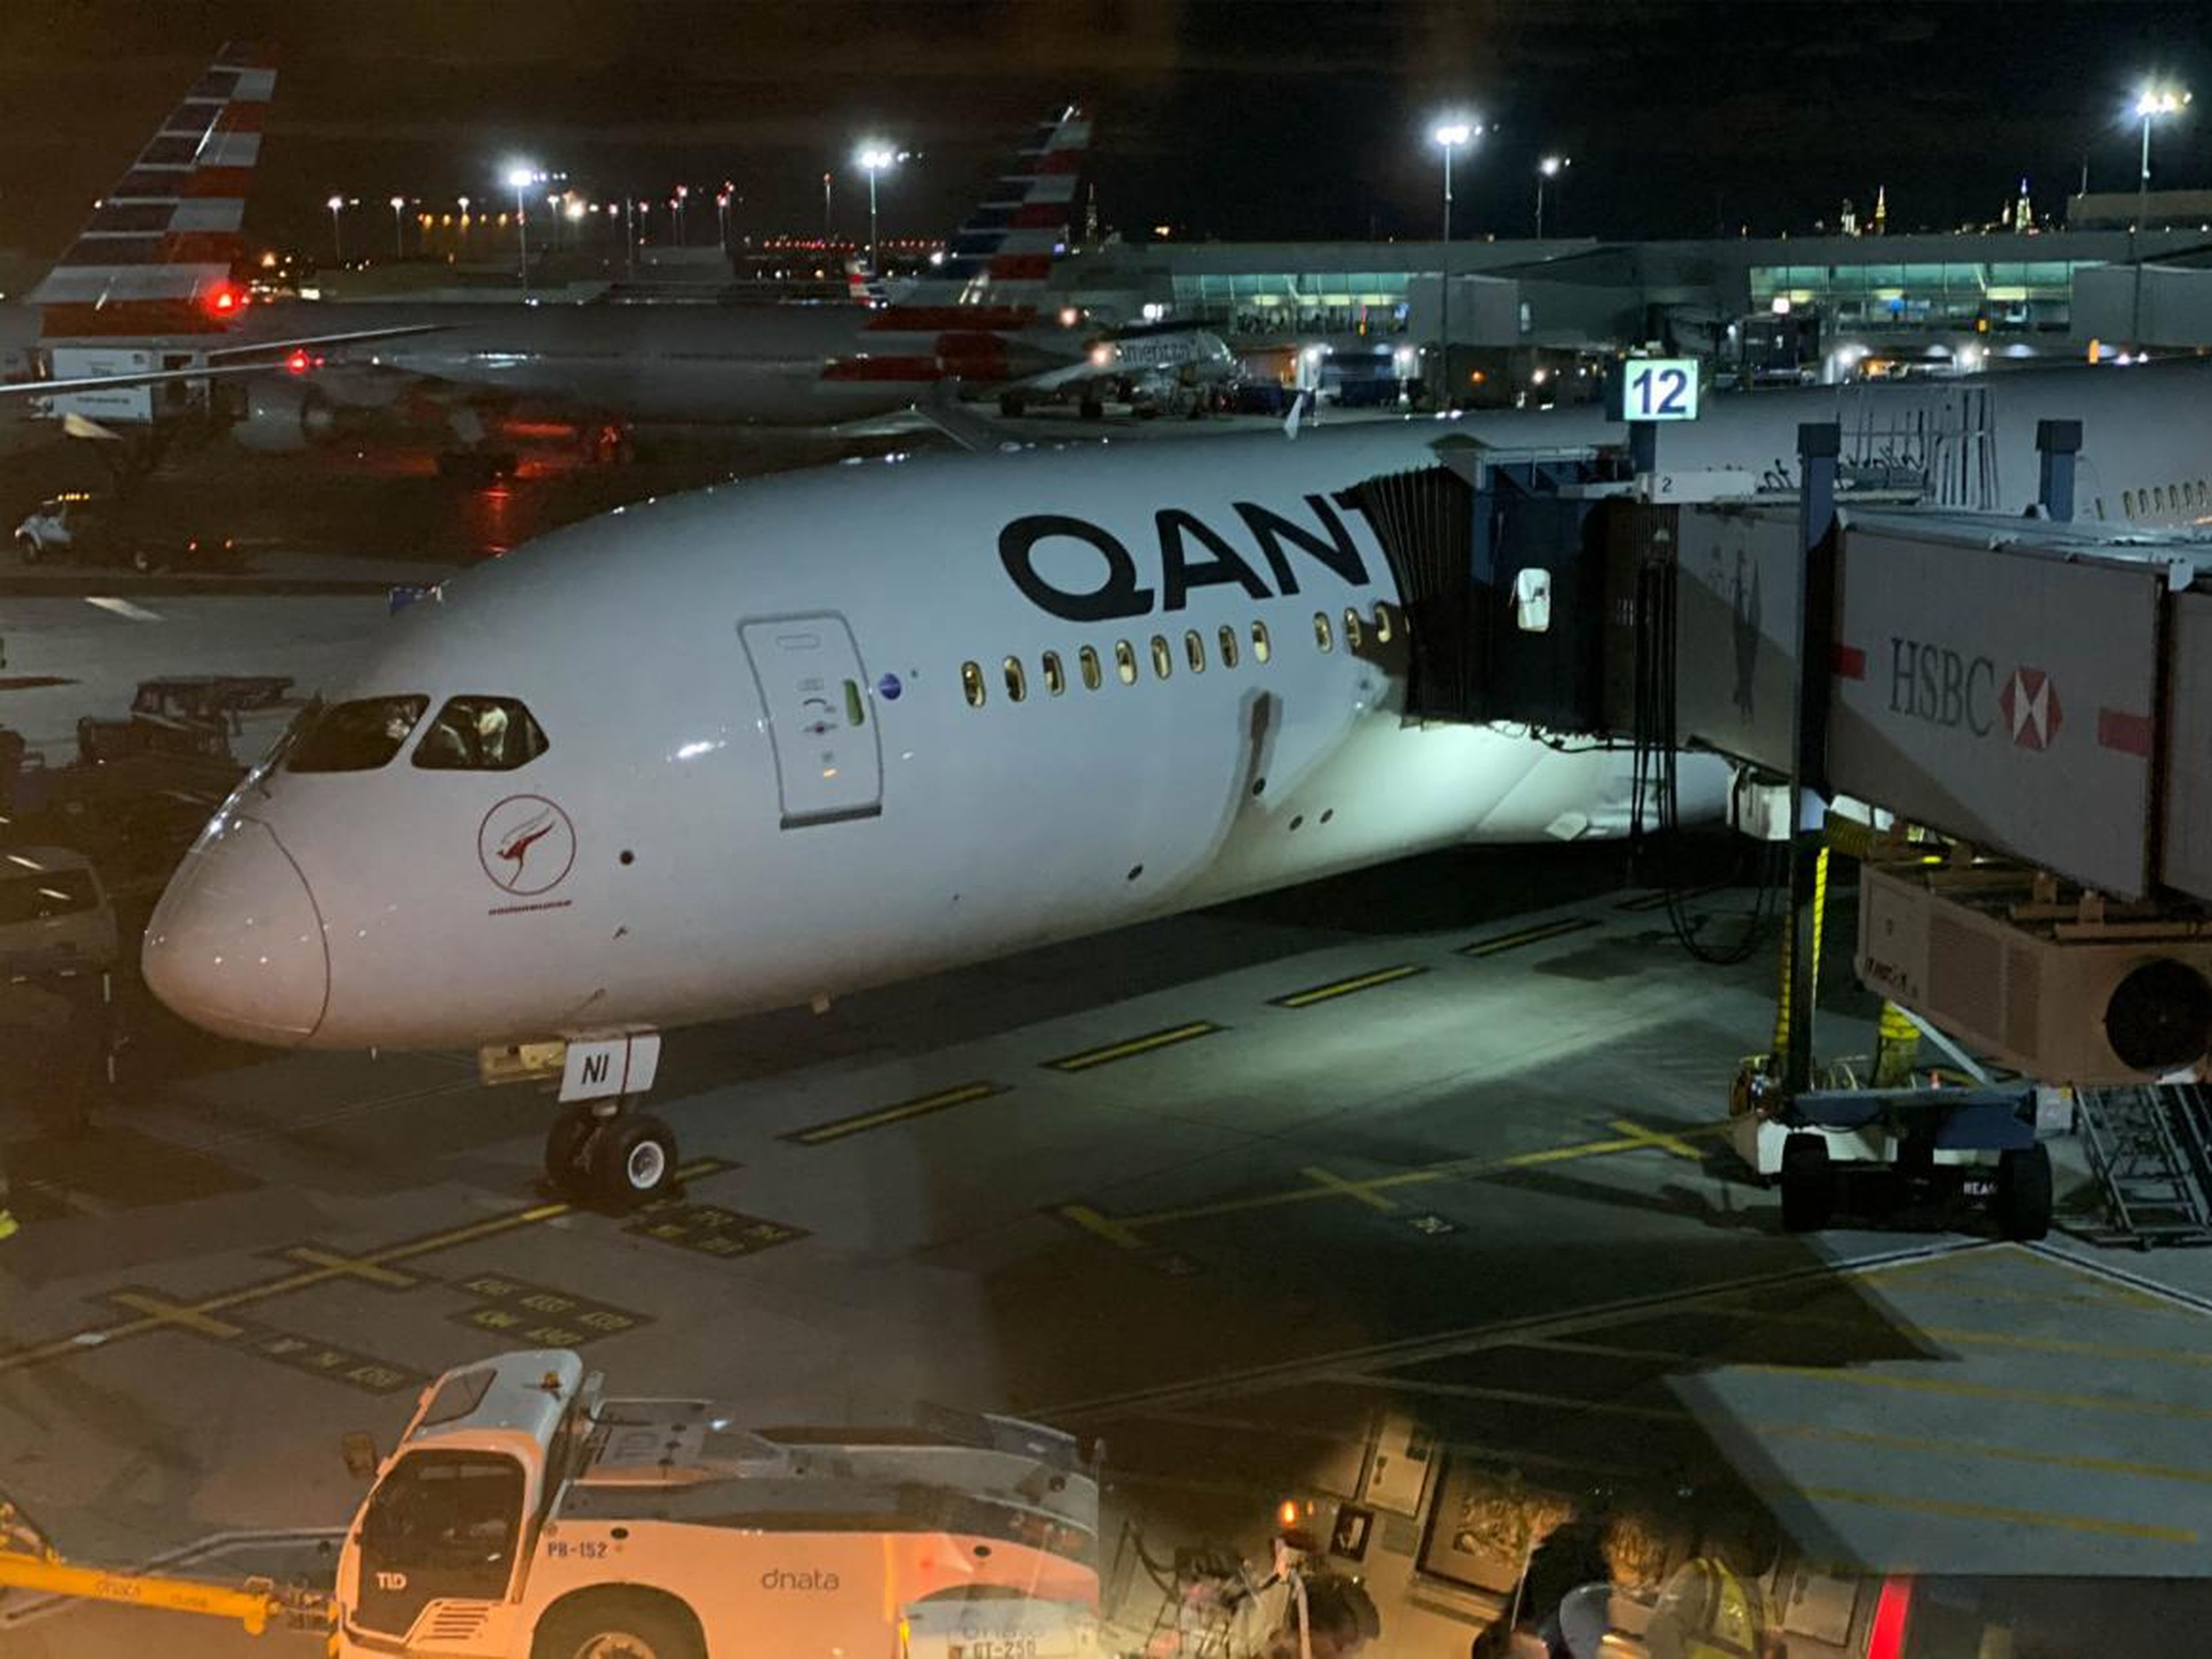 Soon enough, we went down to Gate 12 and got the first glimpse of our home for the next day: a brand-new Boeing 787-9, registration VH-ZNI, delivered to Qantas from Boeing's factory in Seattle just a few days before.